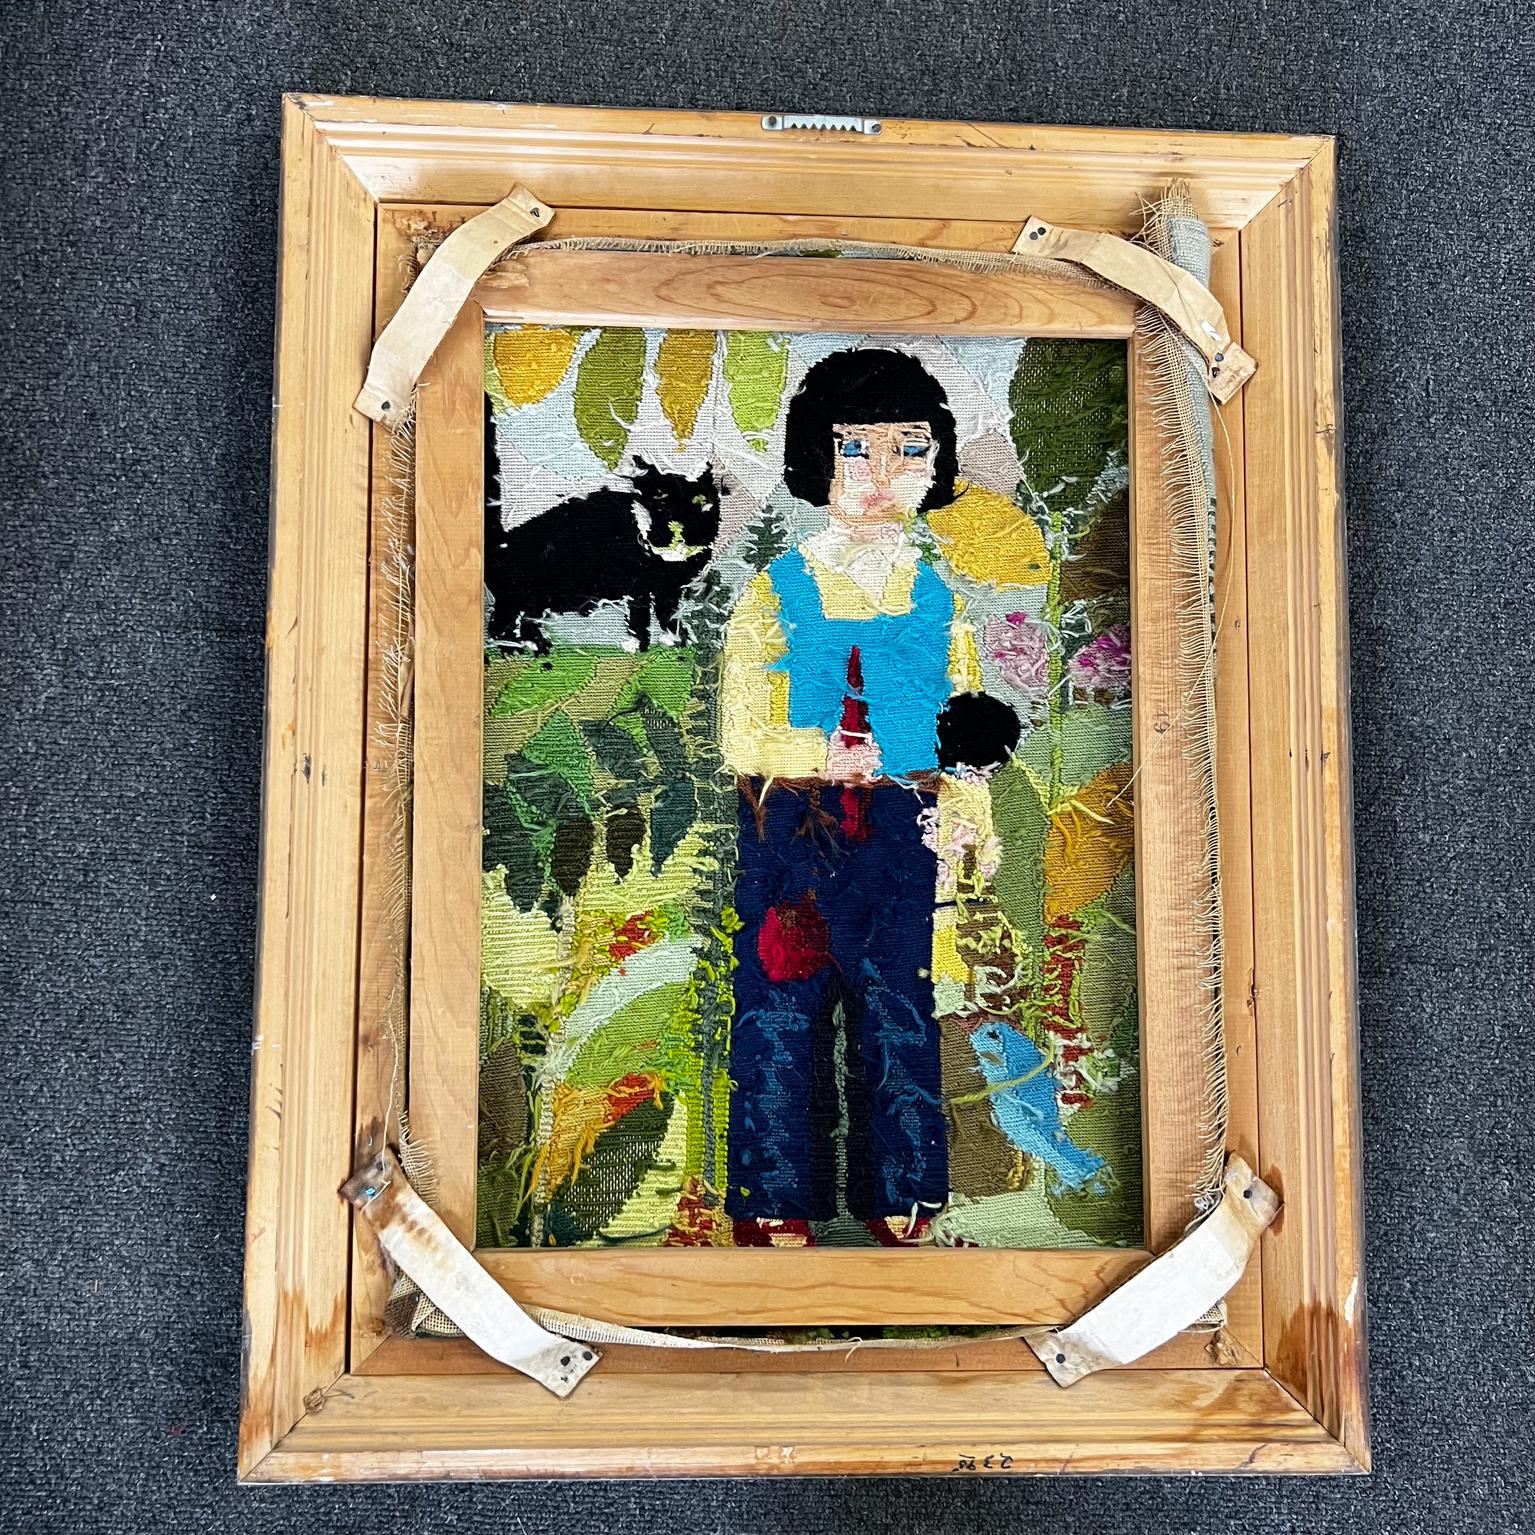 1970s Vibrant Handmade Needlepoint Embroidery Wall Artwork Girl Doll and Cat 4